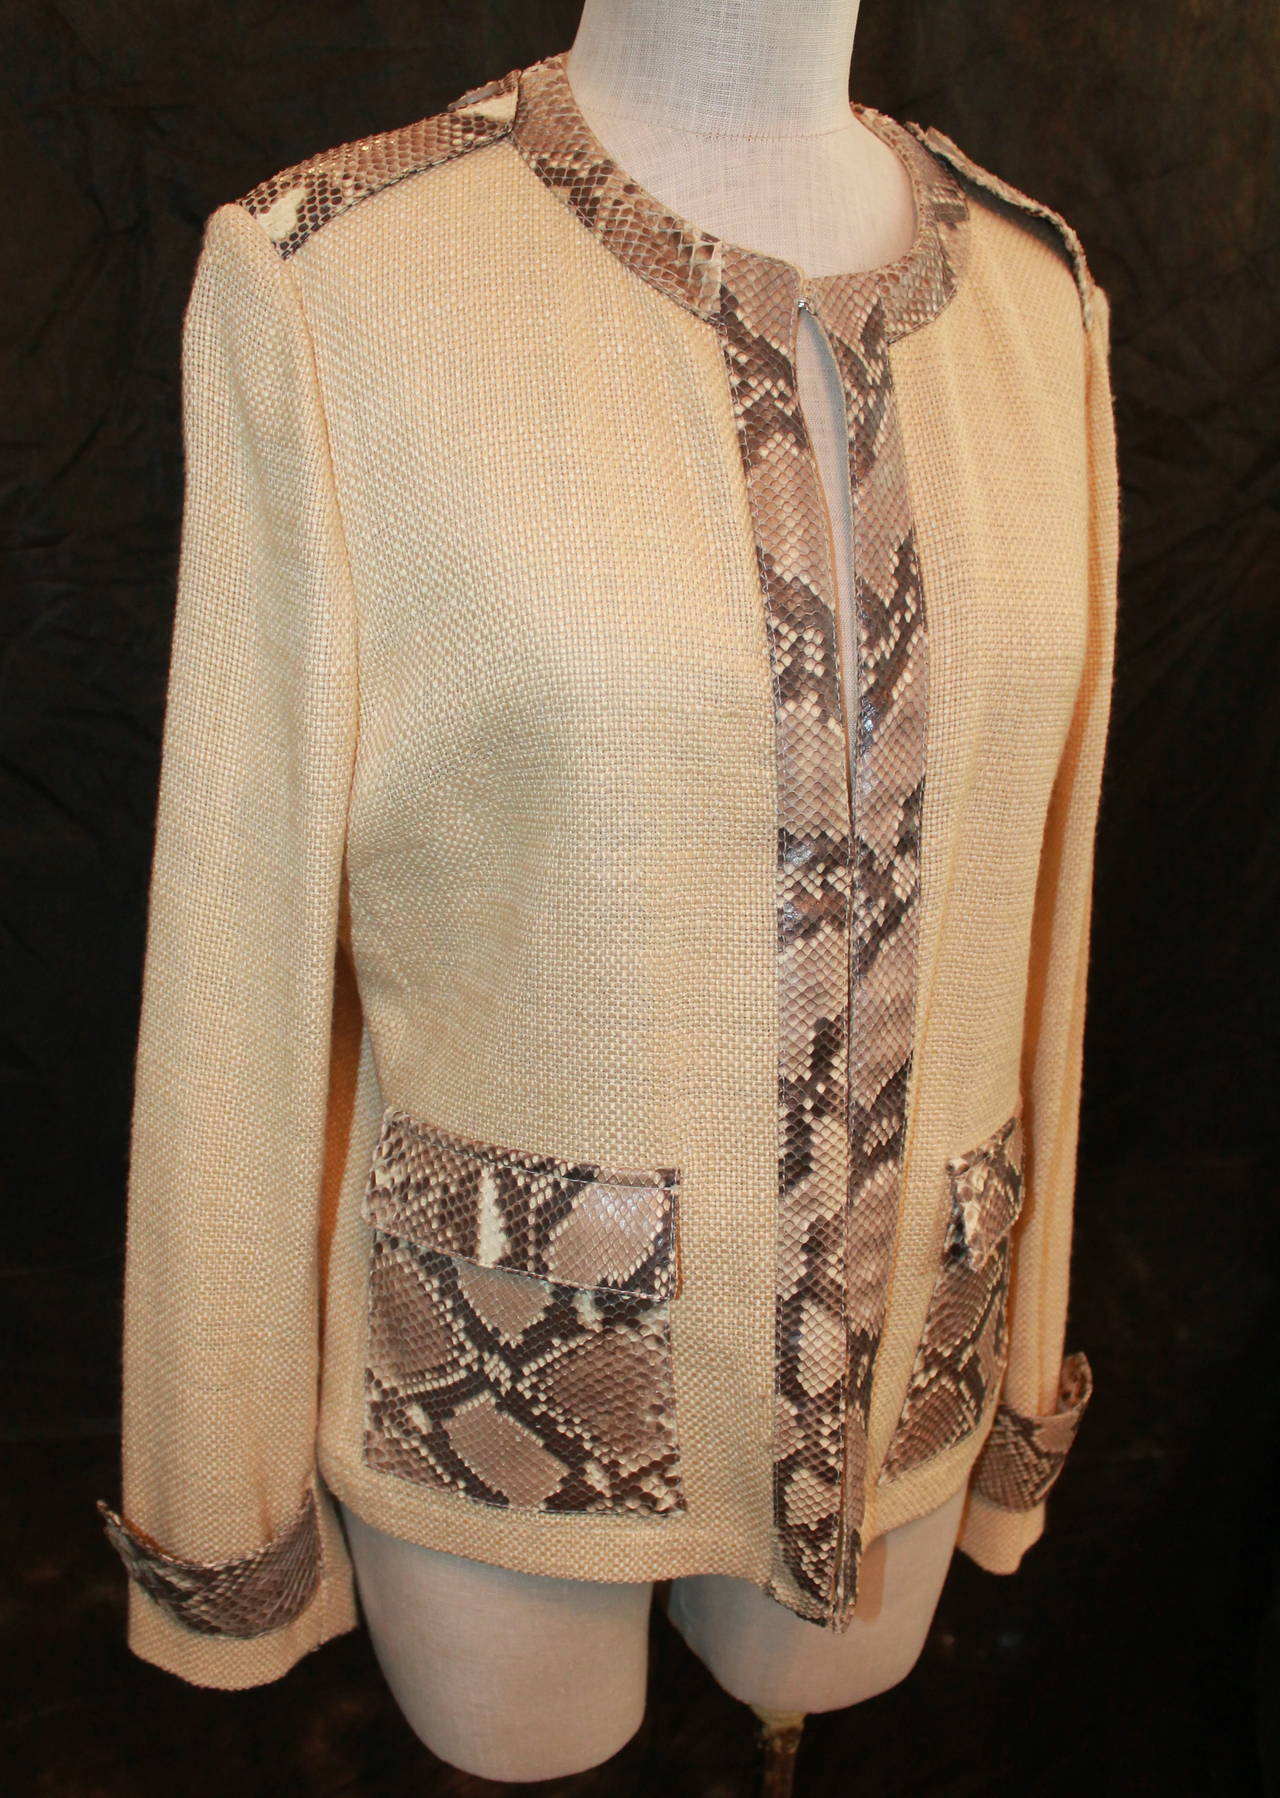 Dolce & Gabbana Tan Linen Jacket with Python Accents. This jacket is in very good condition. It does not have buttons but does have three hooks. It is an Italian size 46.

Measurements:
Shoulder to Shoulder- 16